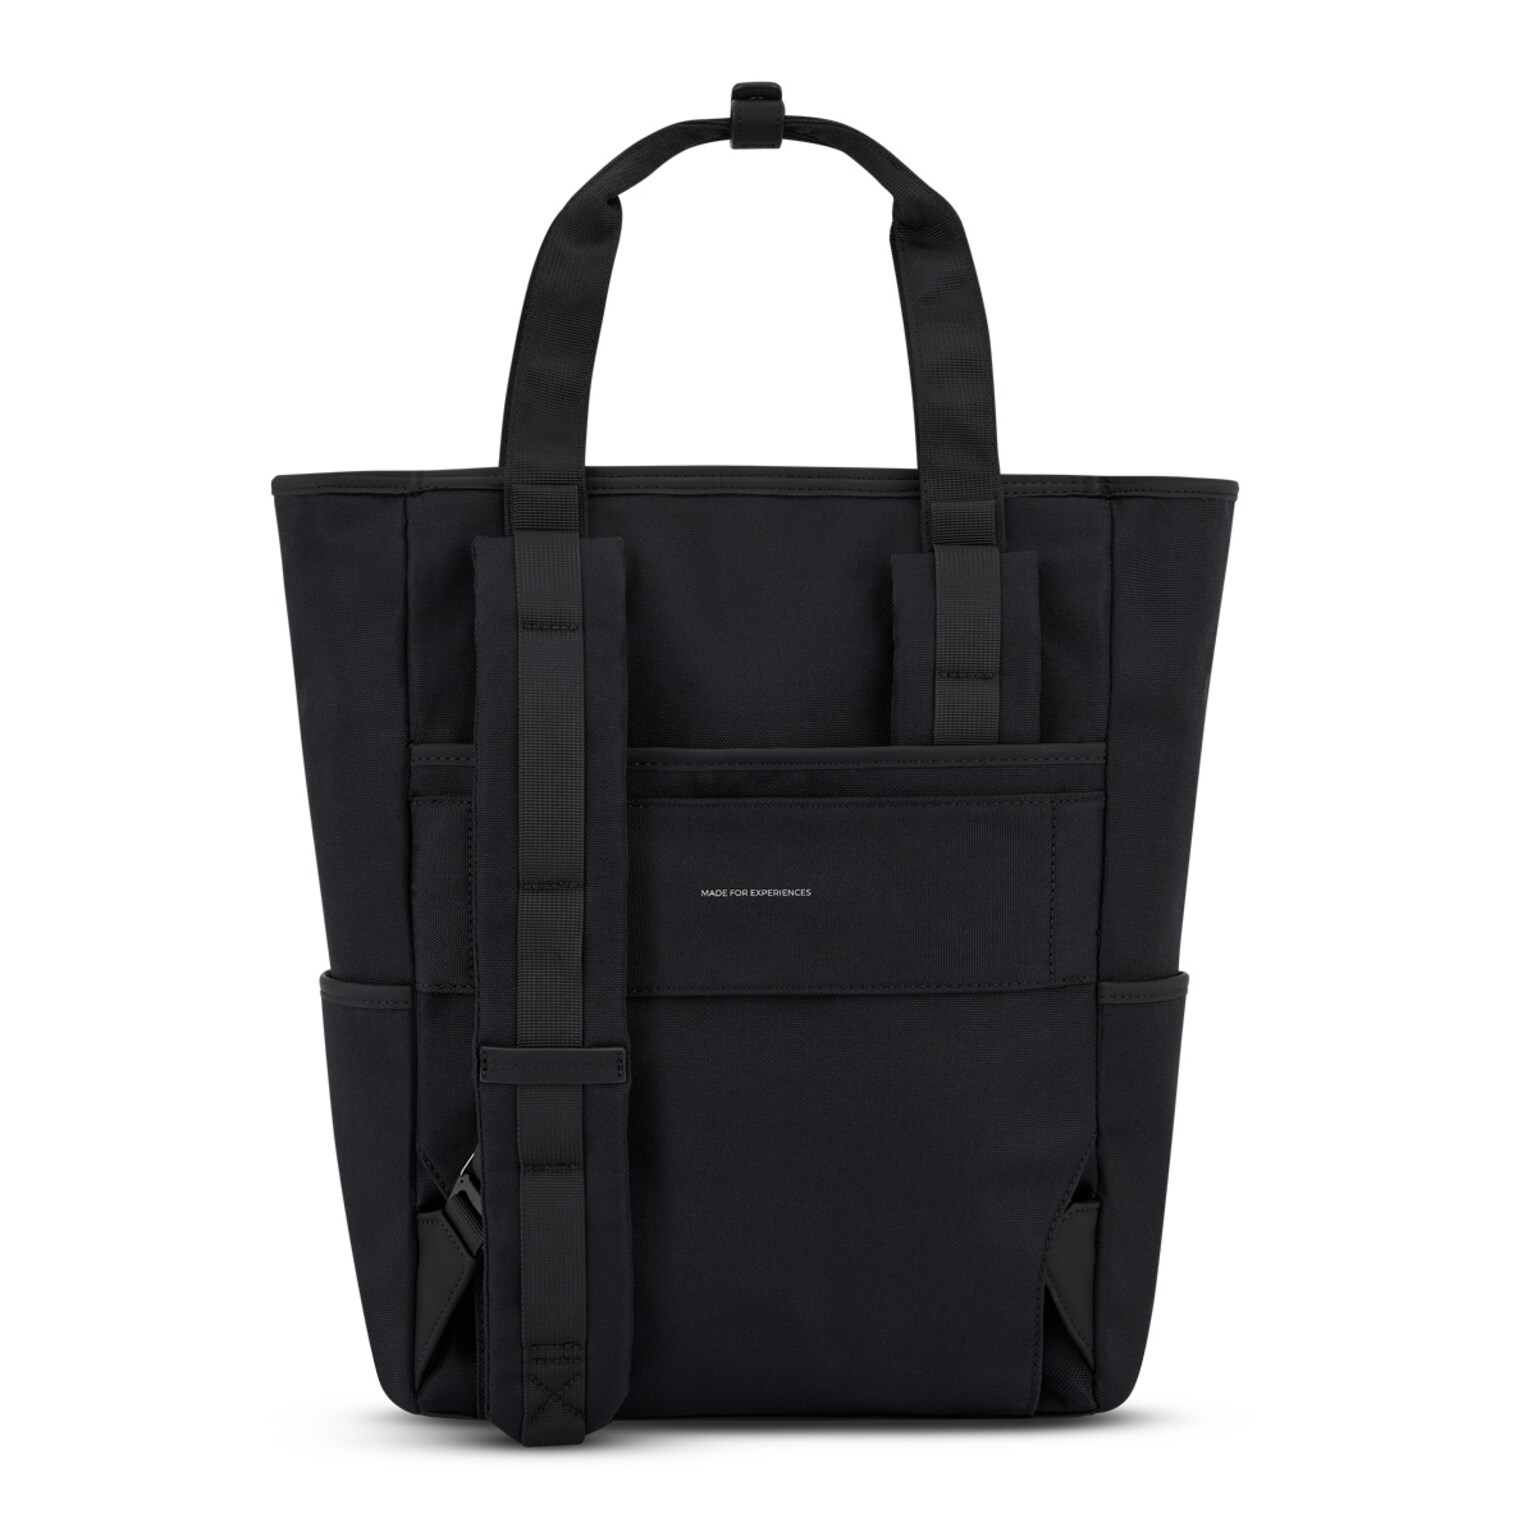 Lindby Diaper Backpack All Black